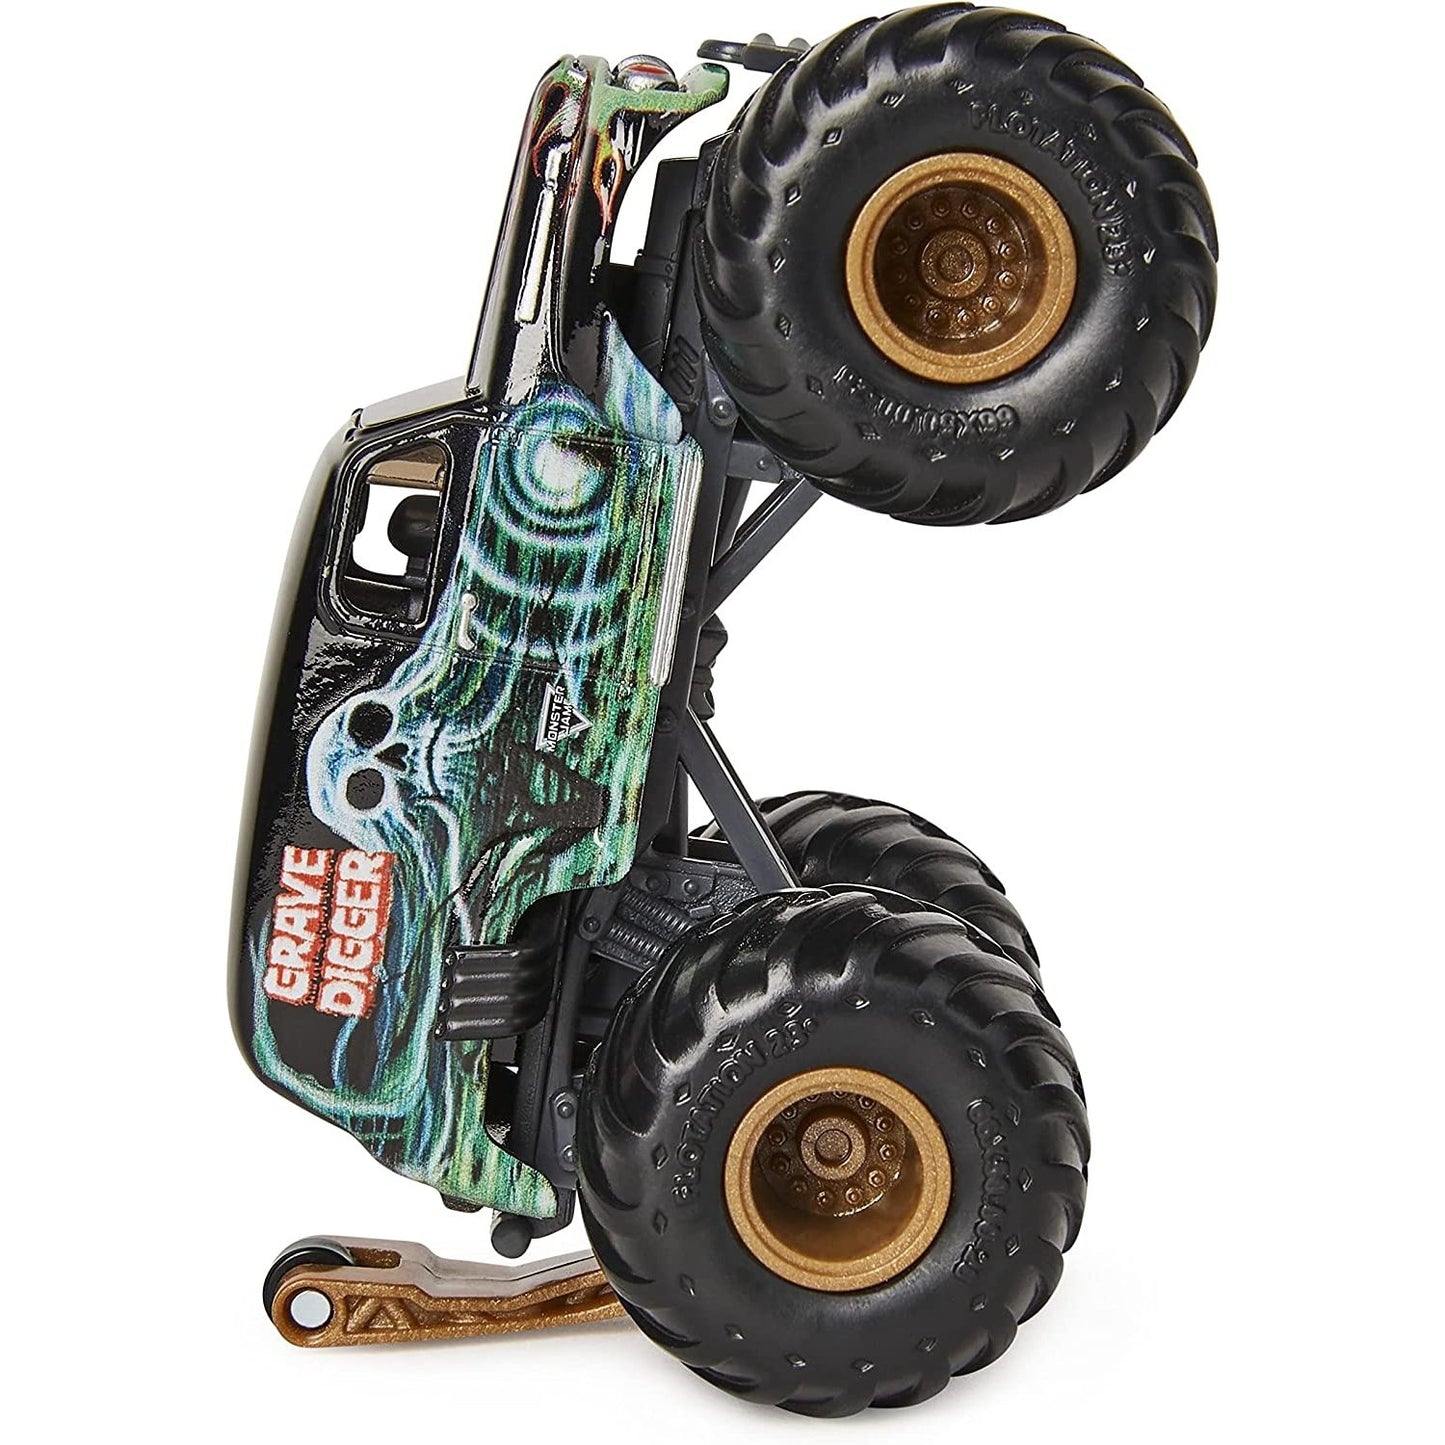 Monster Jam 2021 Spin Master 1:64 Diecast Monster Truck with Wheelie Bar: Retro Rebels Grave Digger from 2P Gaming